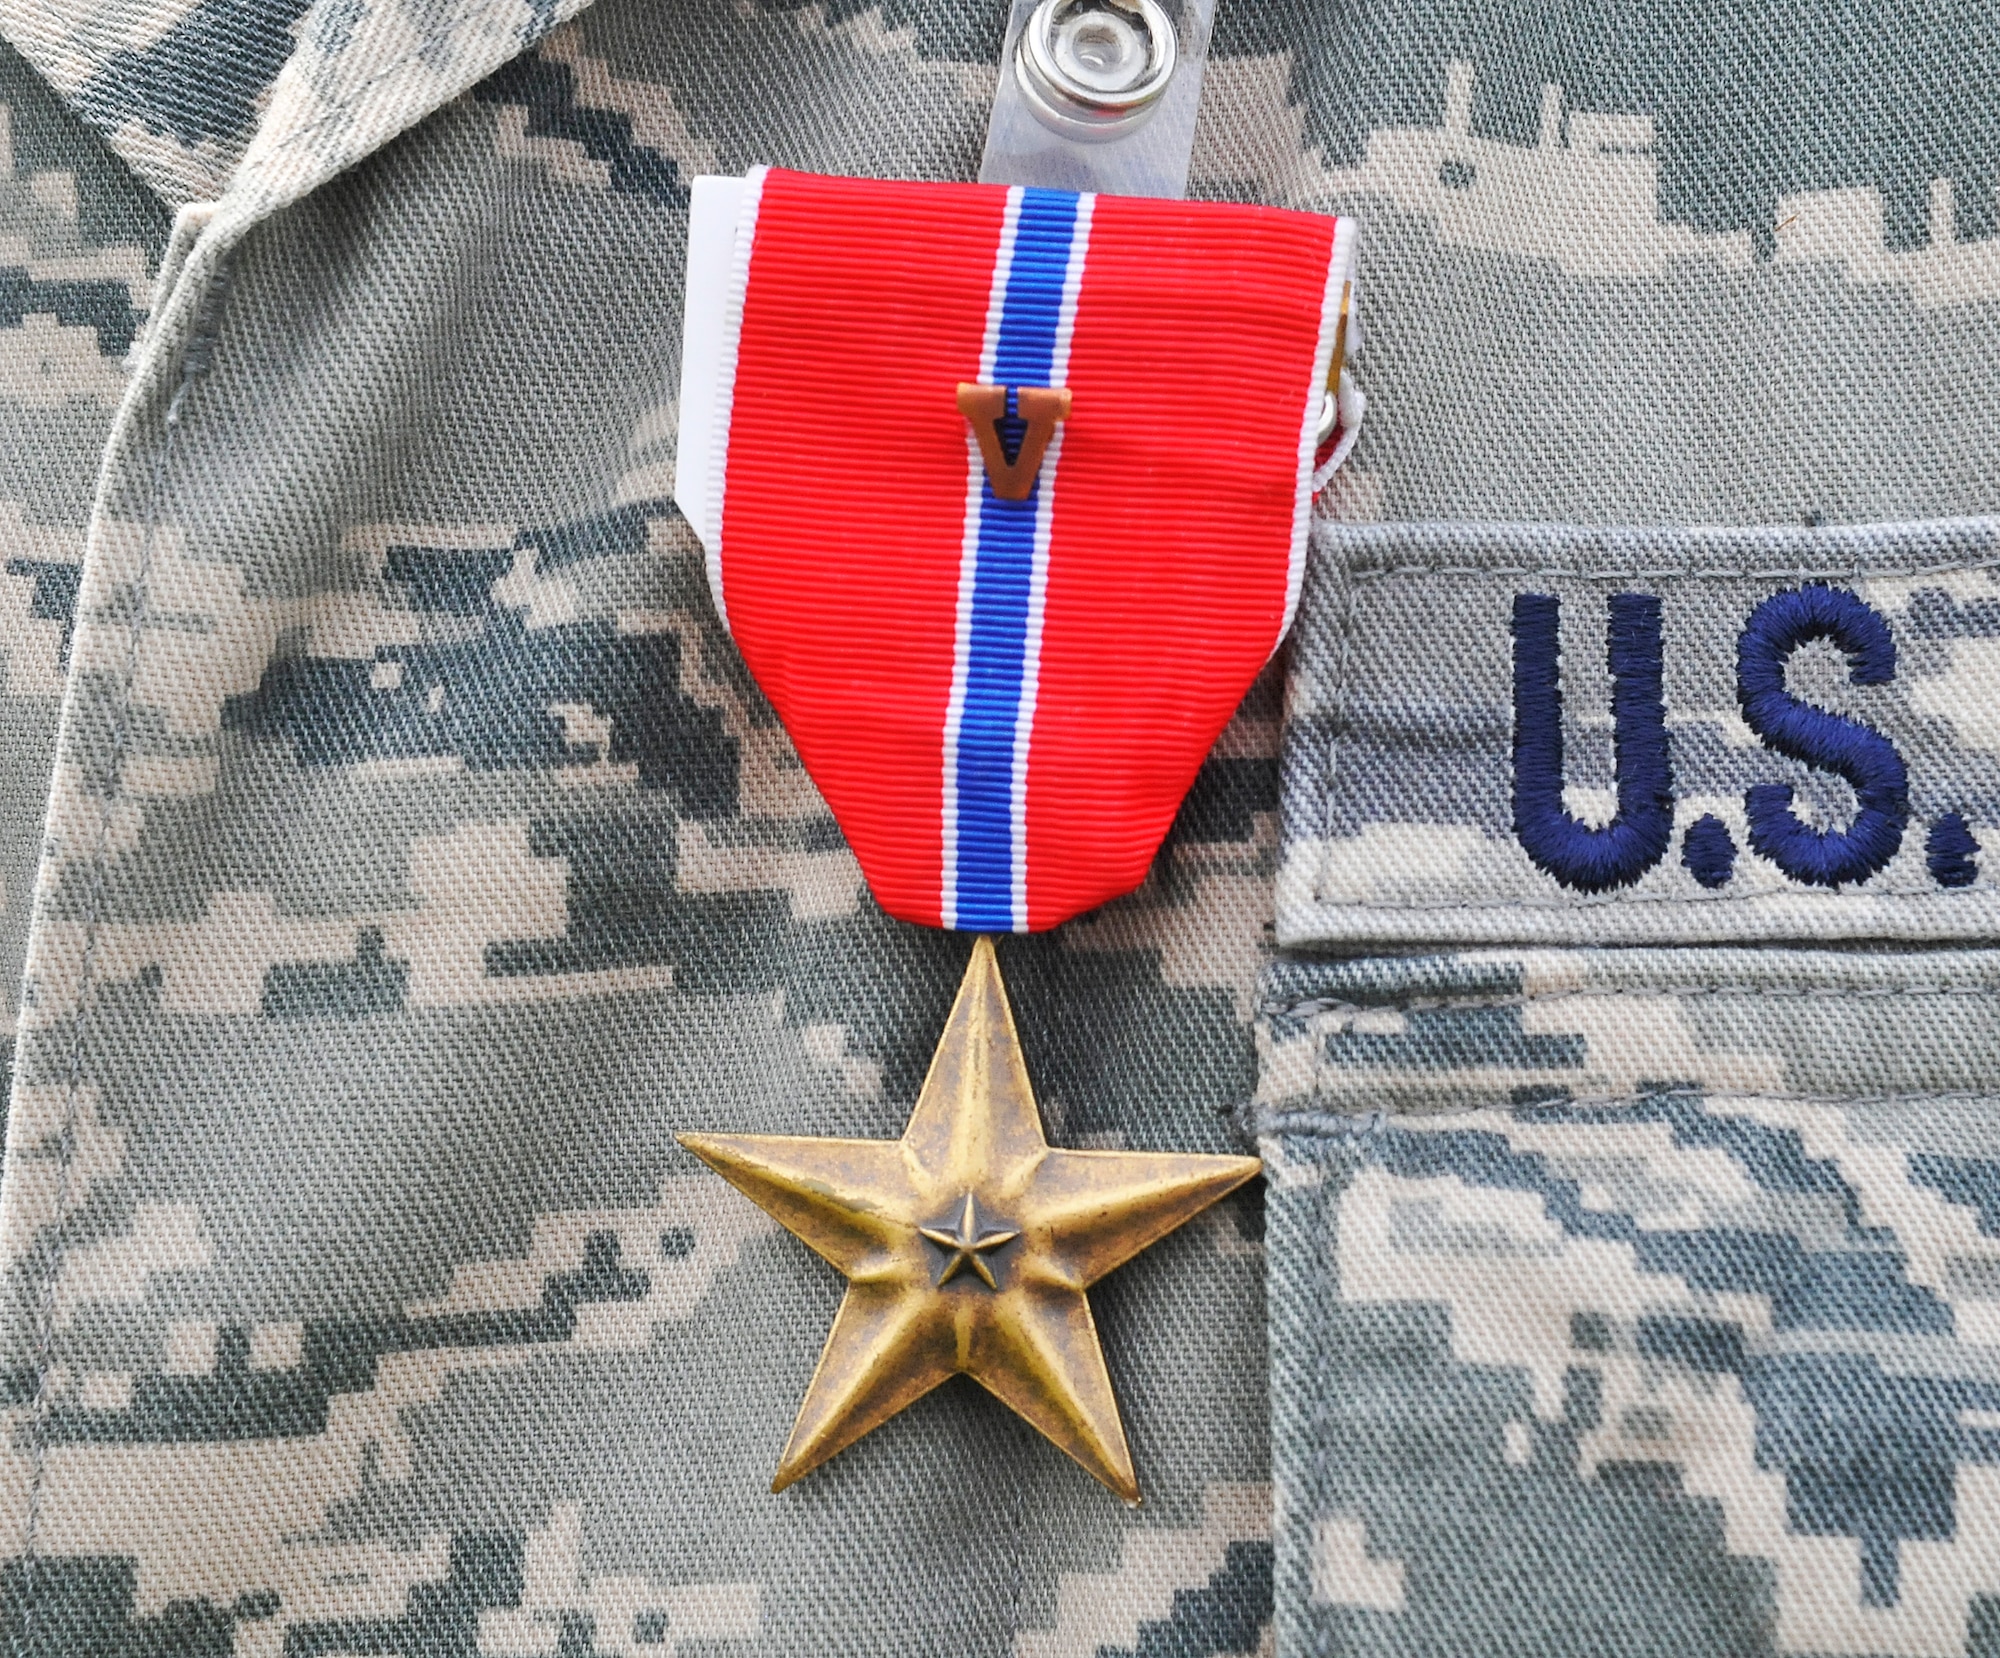 The Bronze Star Medal with Valor is the fourth highest combat award in the armed forces.  